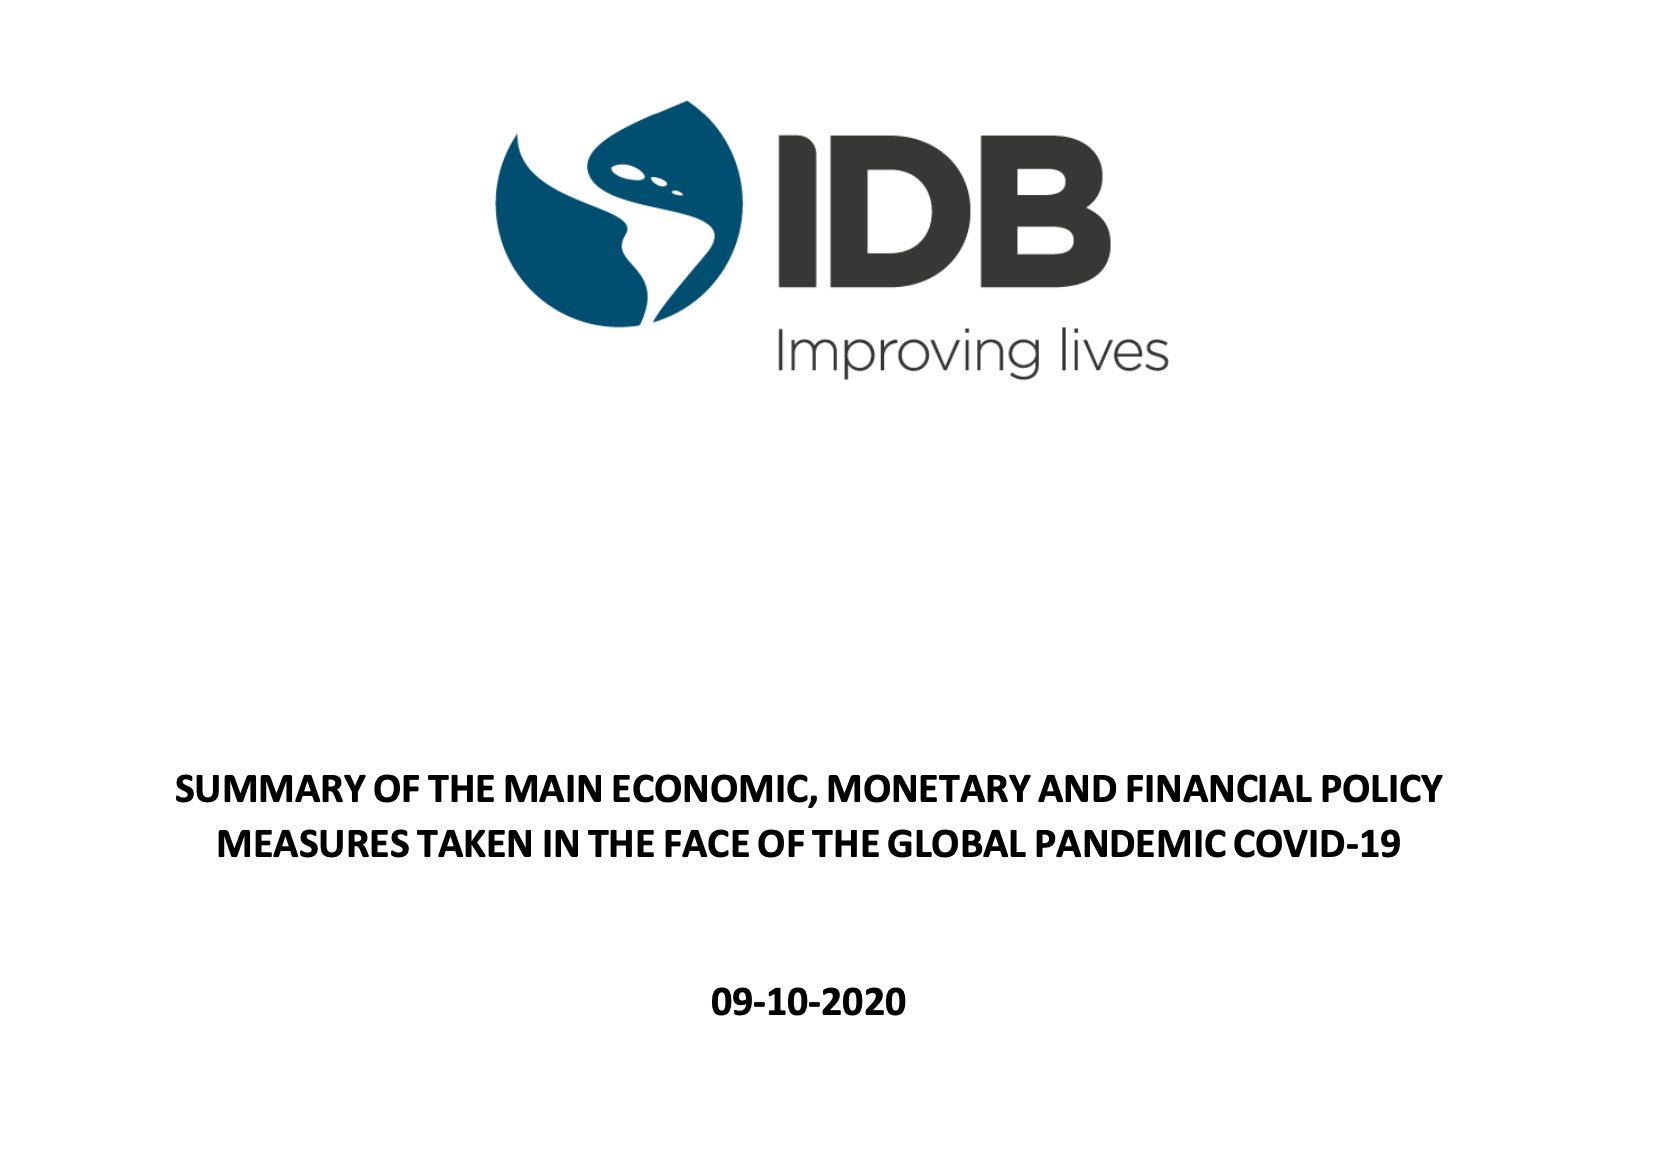 Summary of the main Economic, Monetary and Financial Policy Measures taken in the face of the Global Pandemic COVID-19